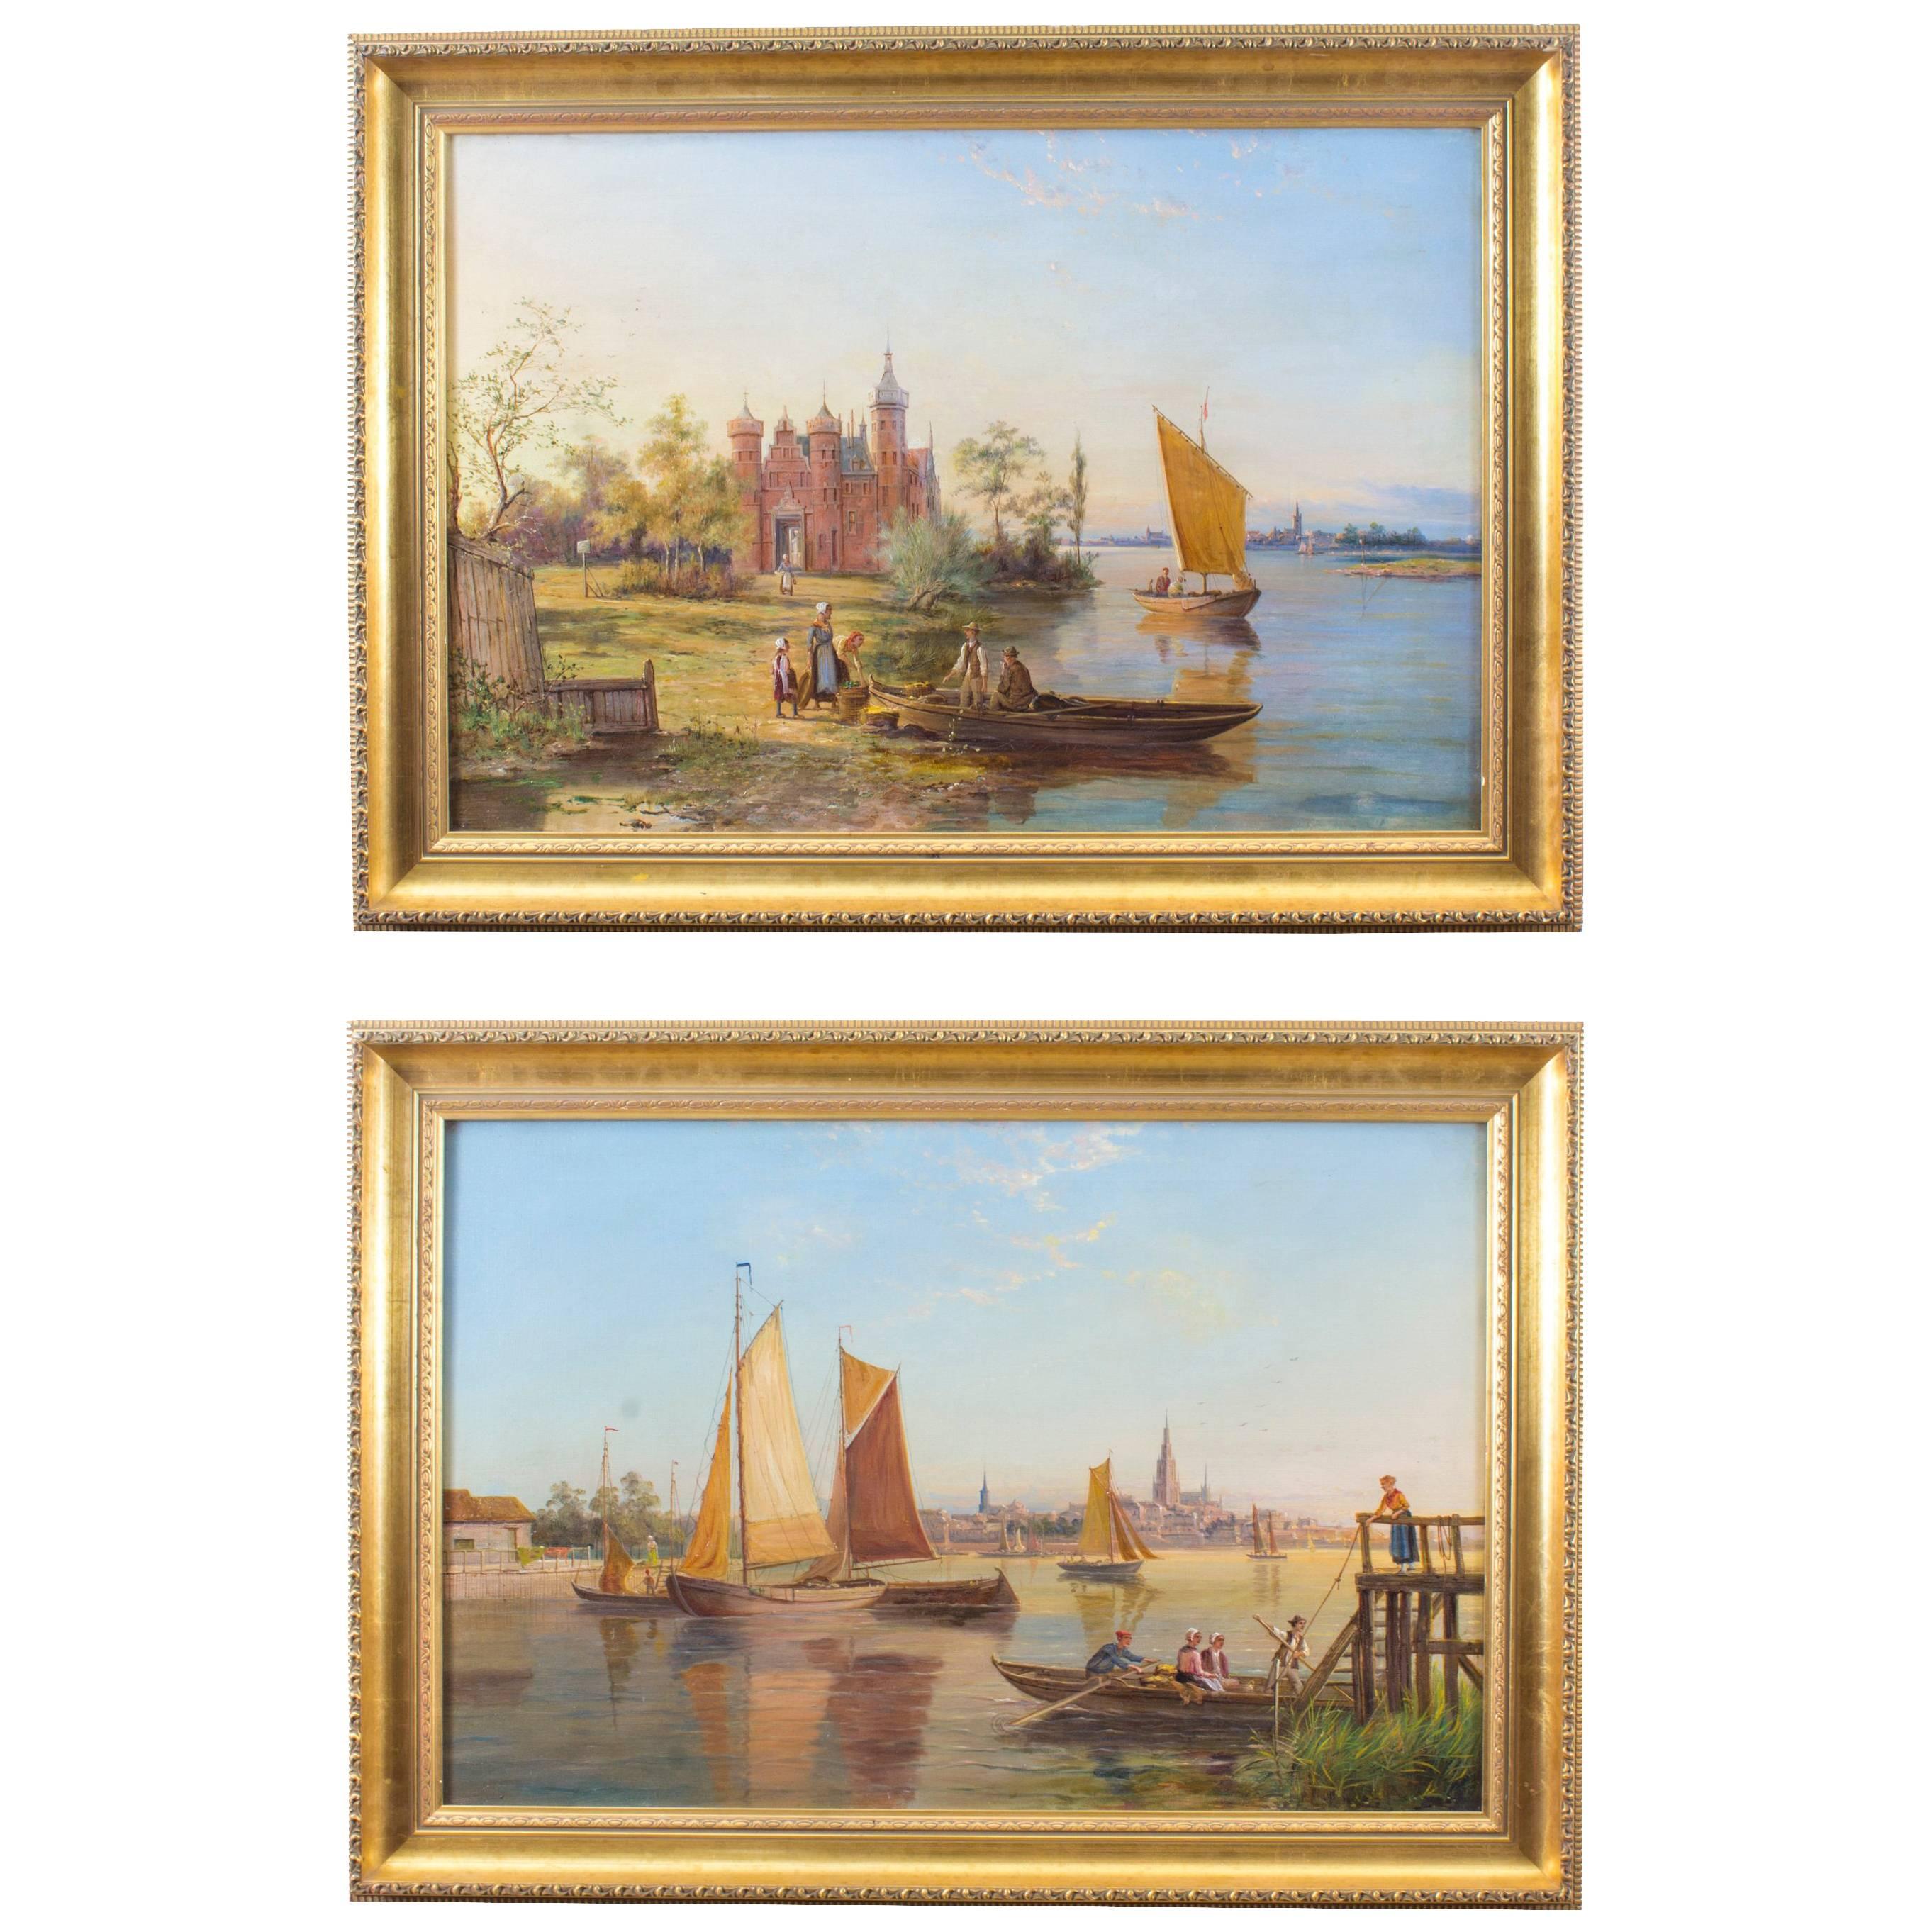 Antique Pair of Waterscape Oil Paintings by William Dommersen, circa 1880